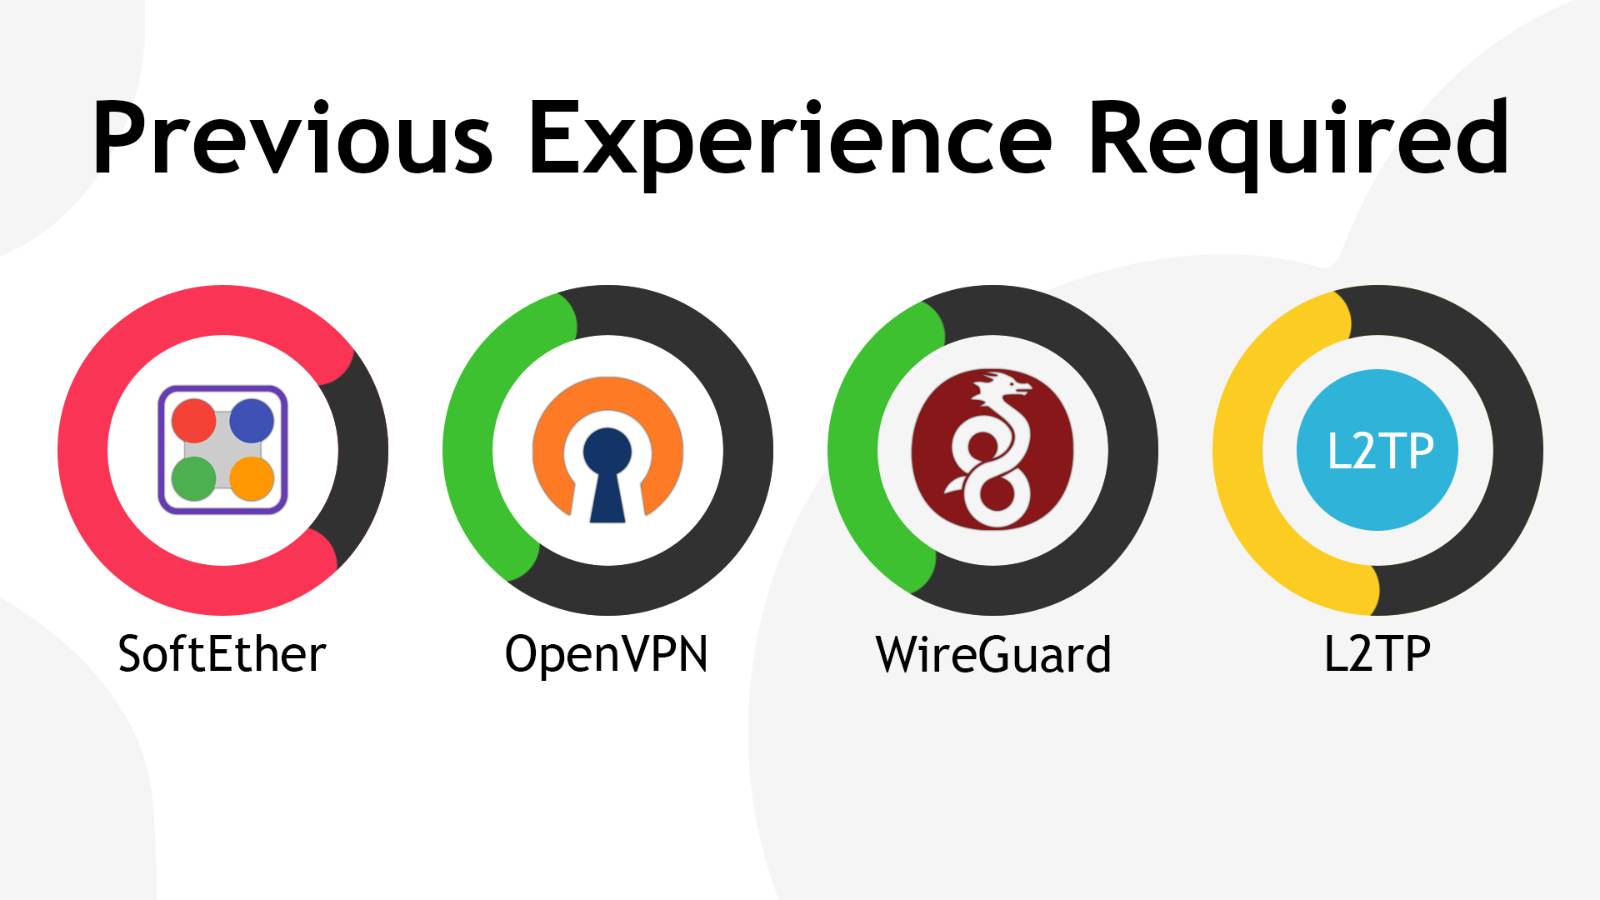 comparison between the different vpn protocols in terms of whether previous experience is beneficial